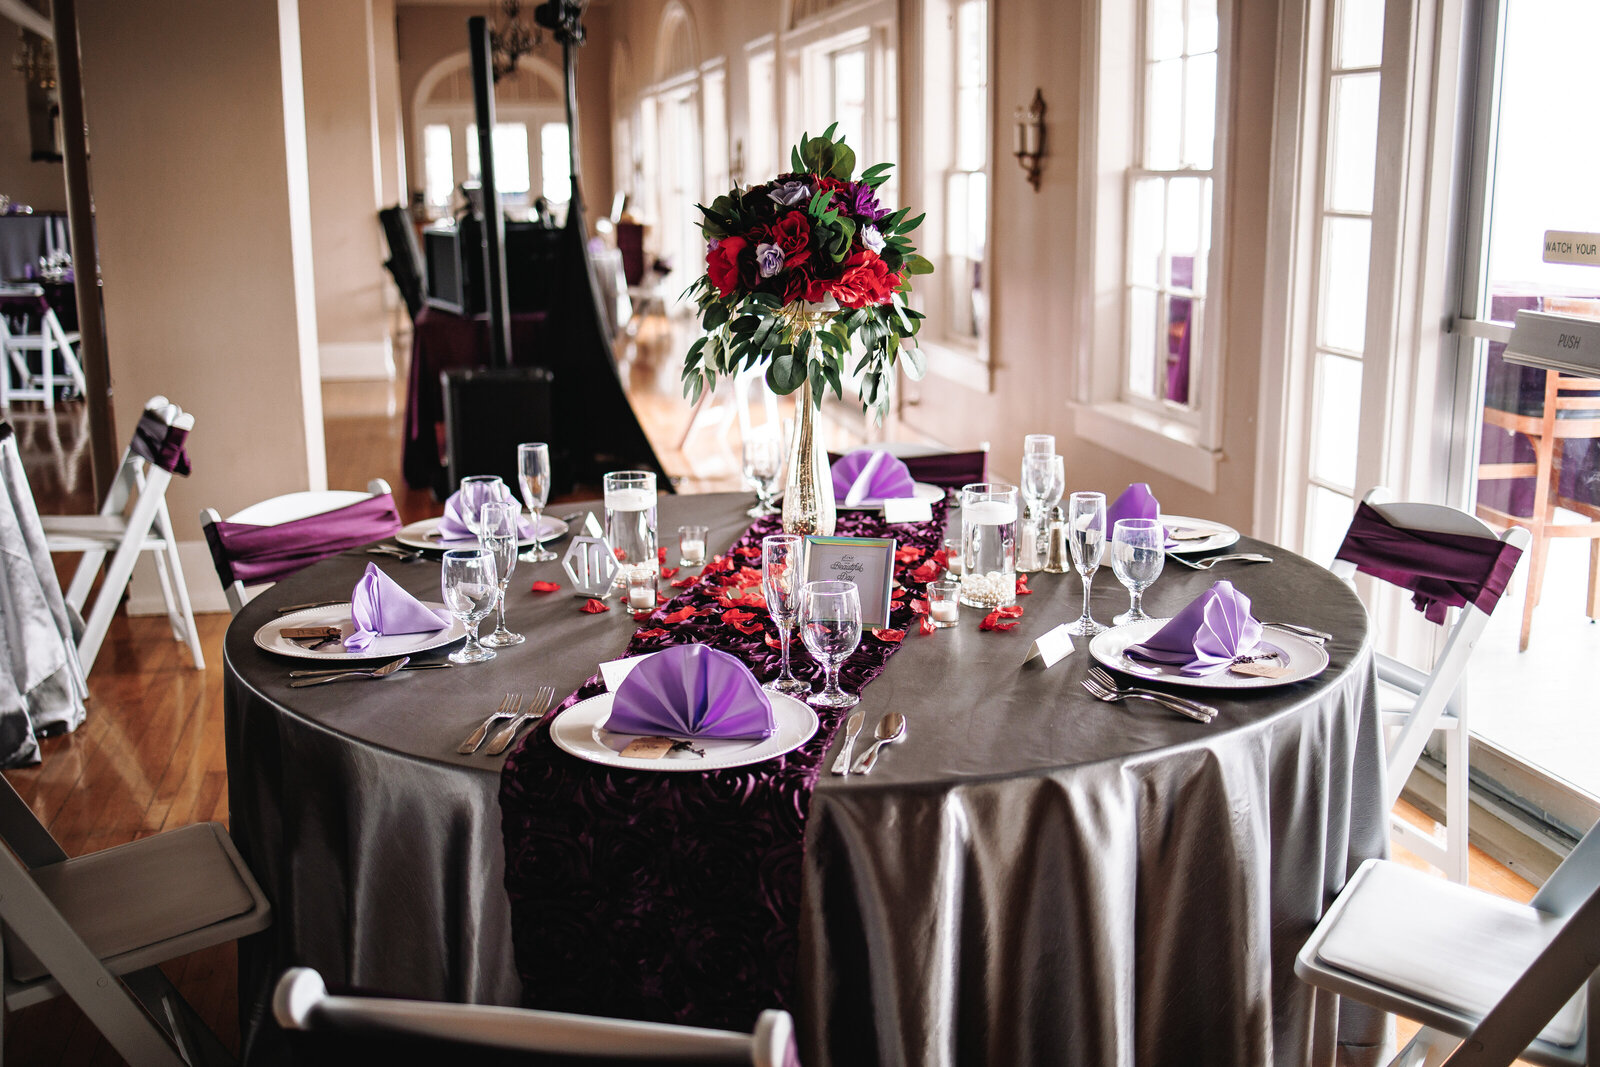 Beautiful dinner table setup at a wedding reception